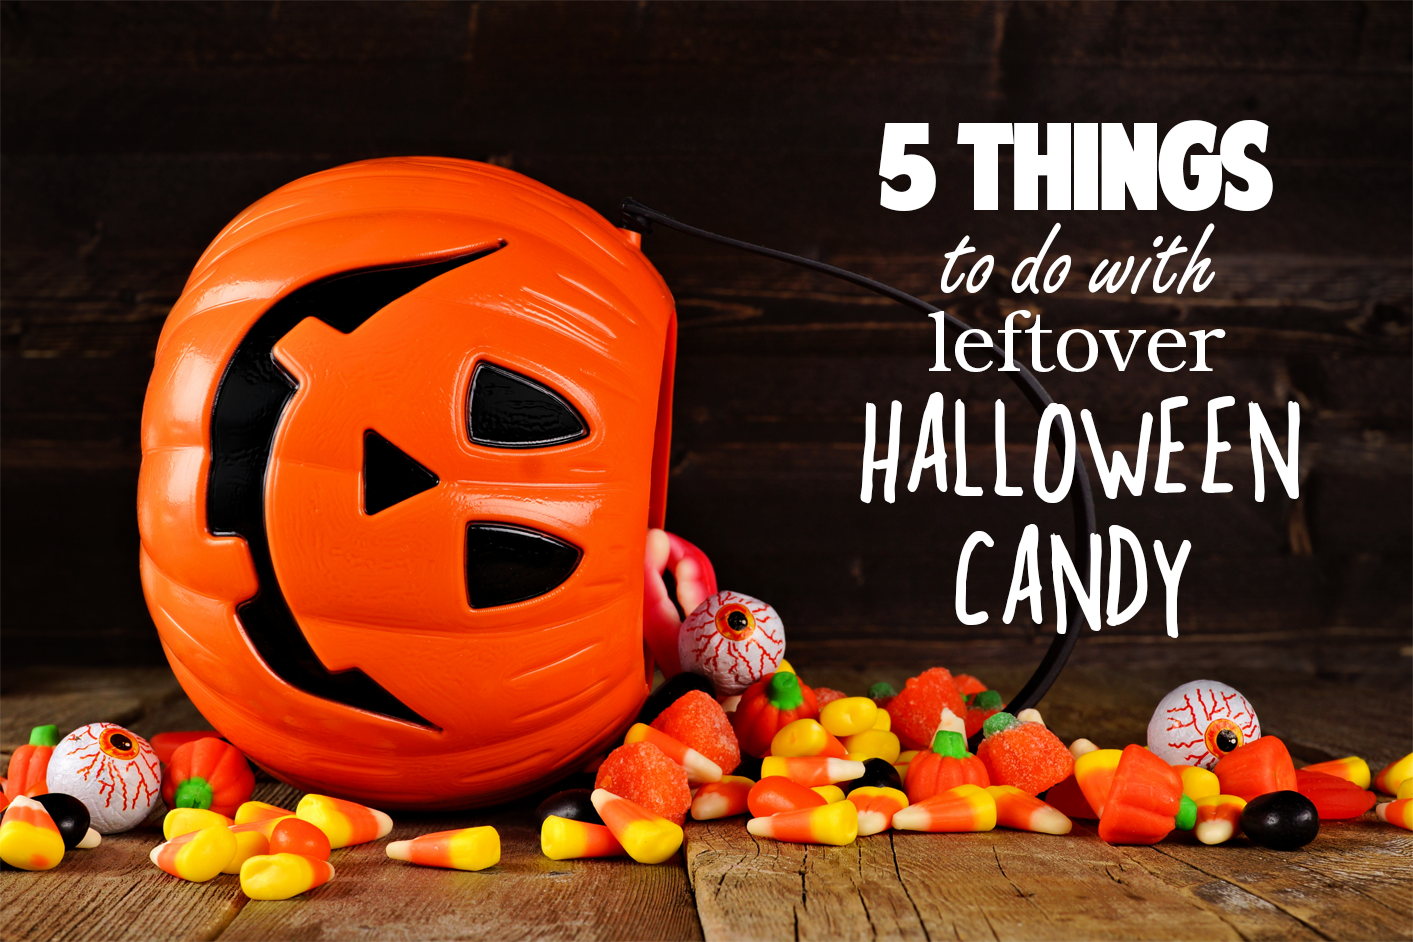 5 Things To Do With All of That Leftover Halloween Candy